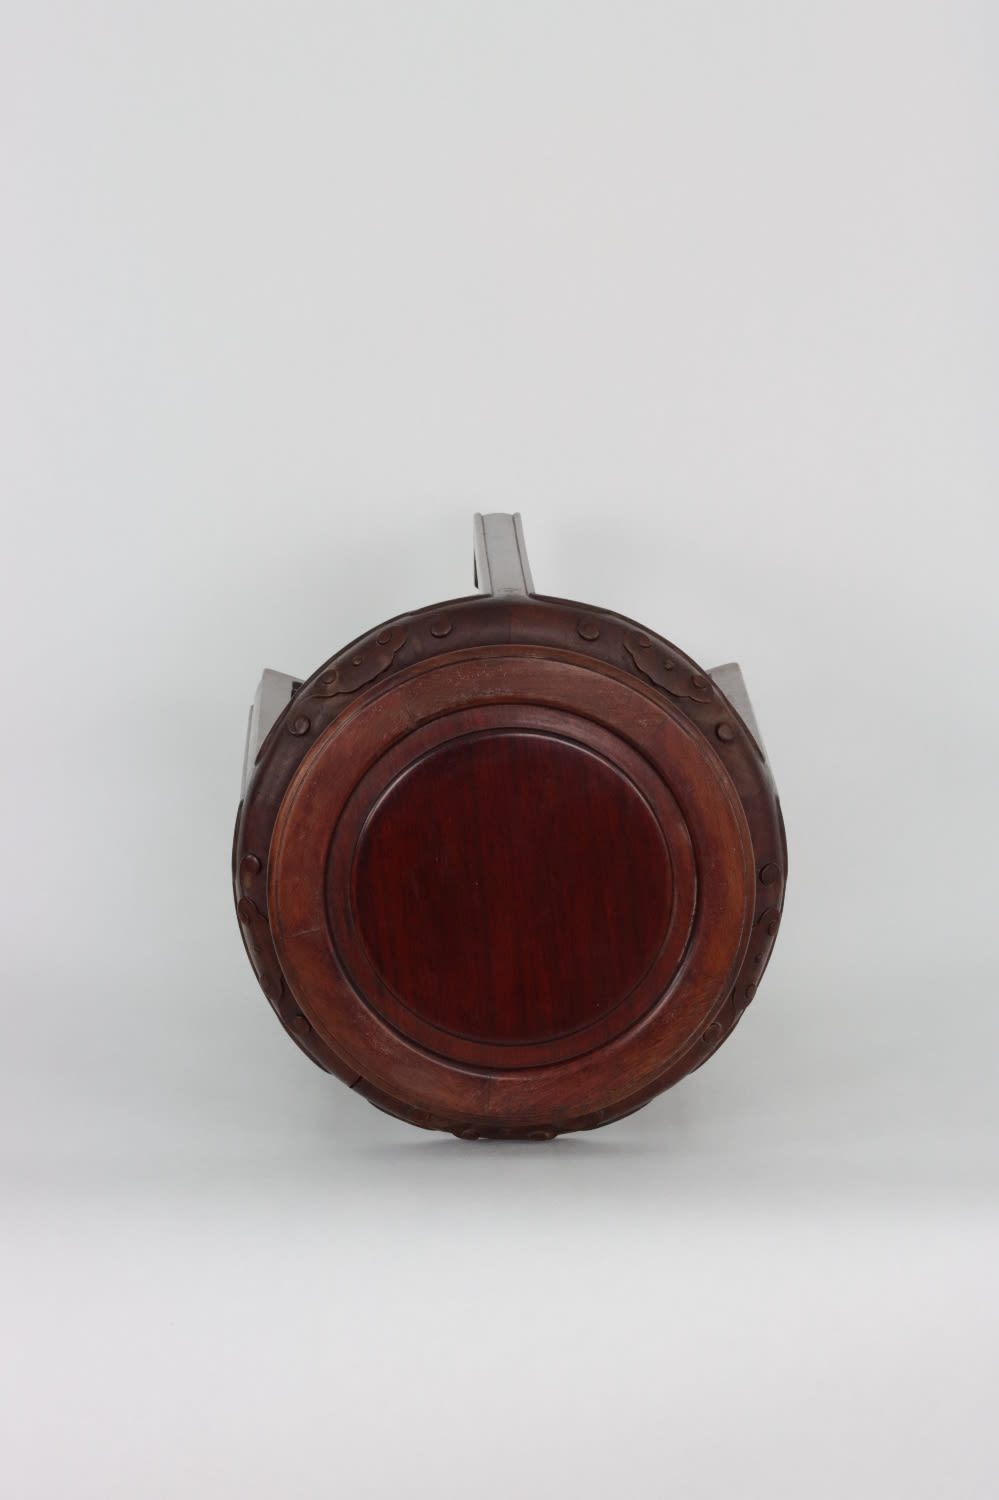 A Chinese rosewood planter, 20th century - Image 2 of 2